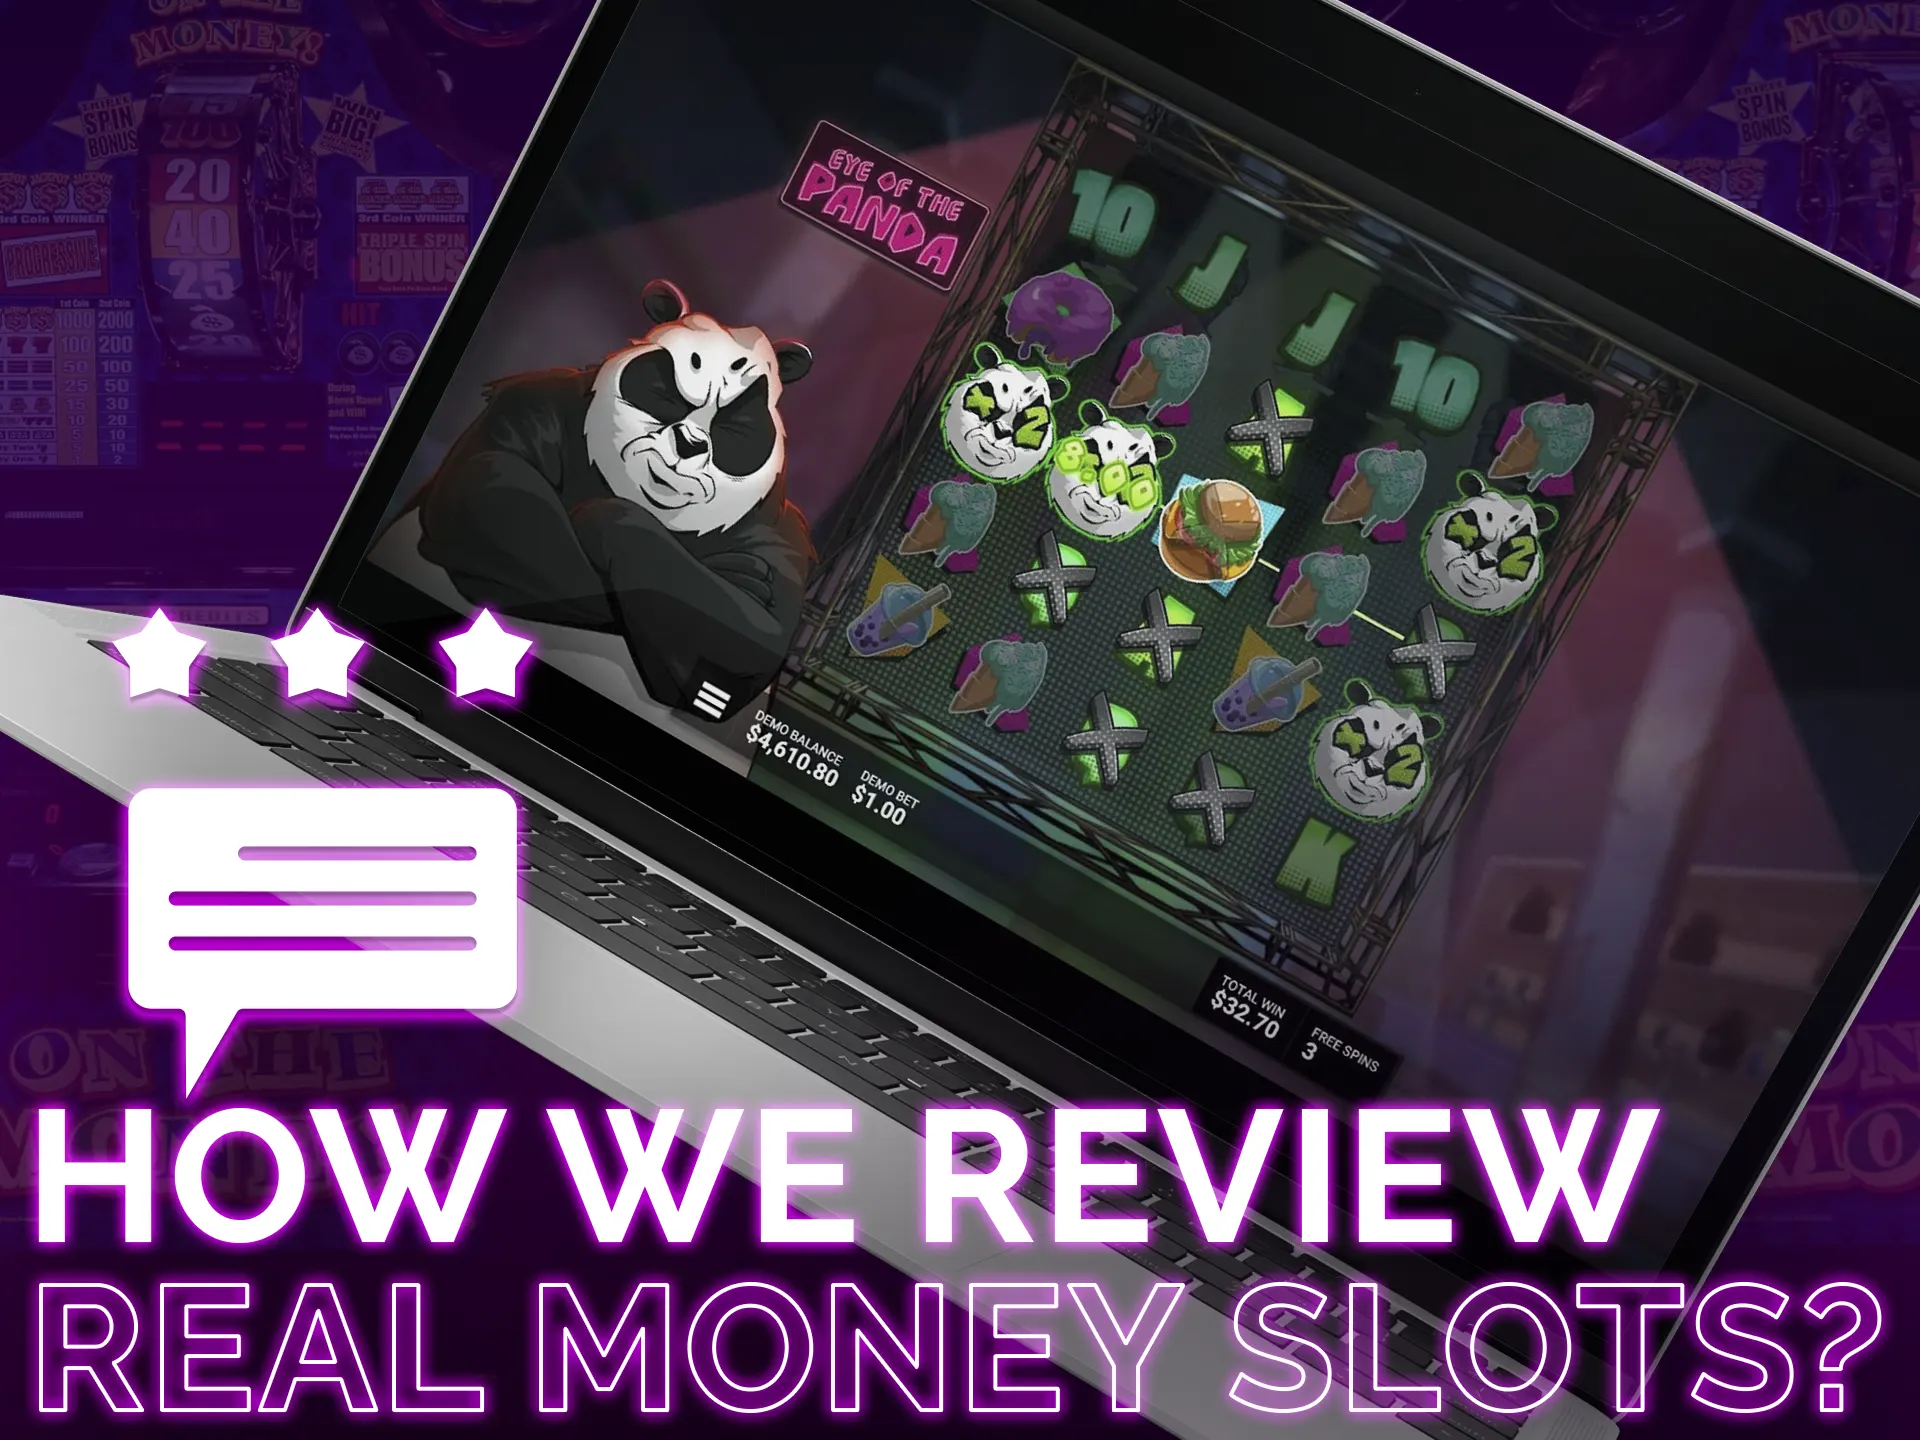 Familiarise yourself with the criteria for choosing Real Money Slots.